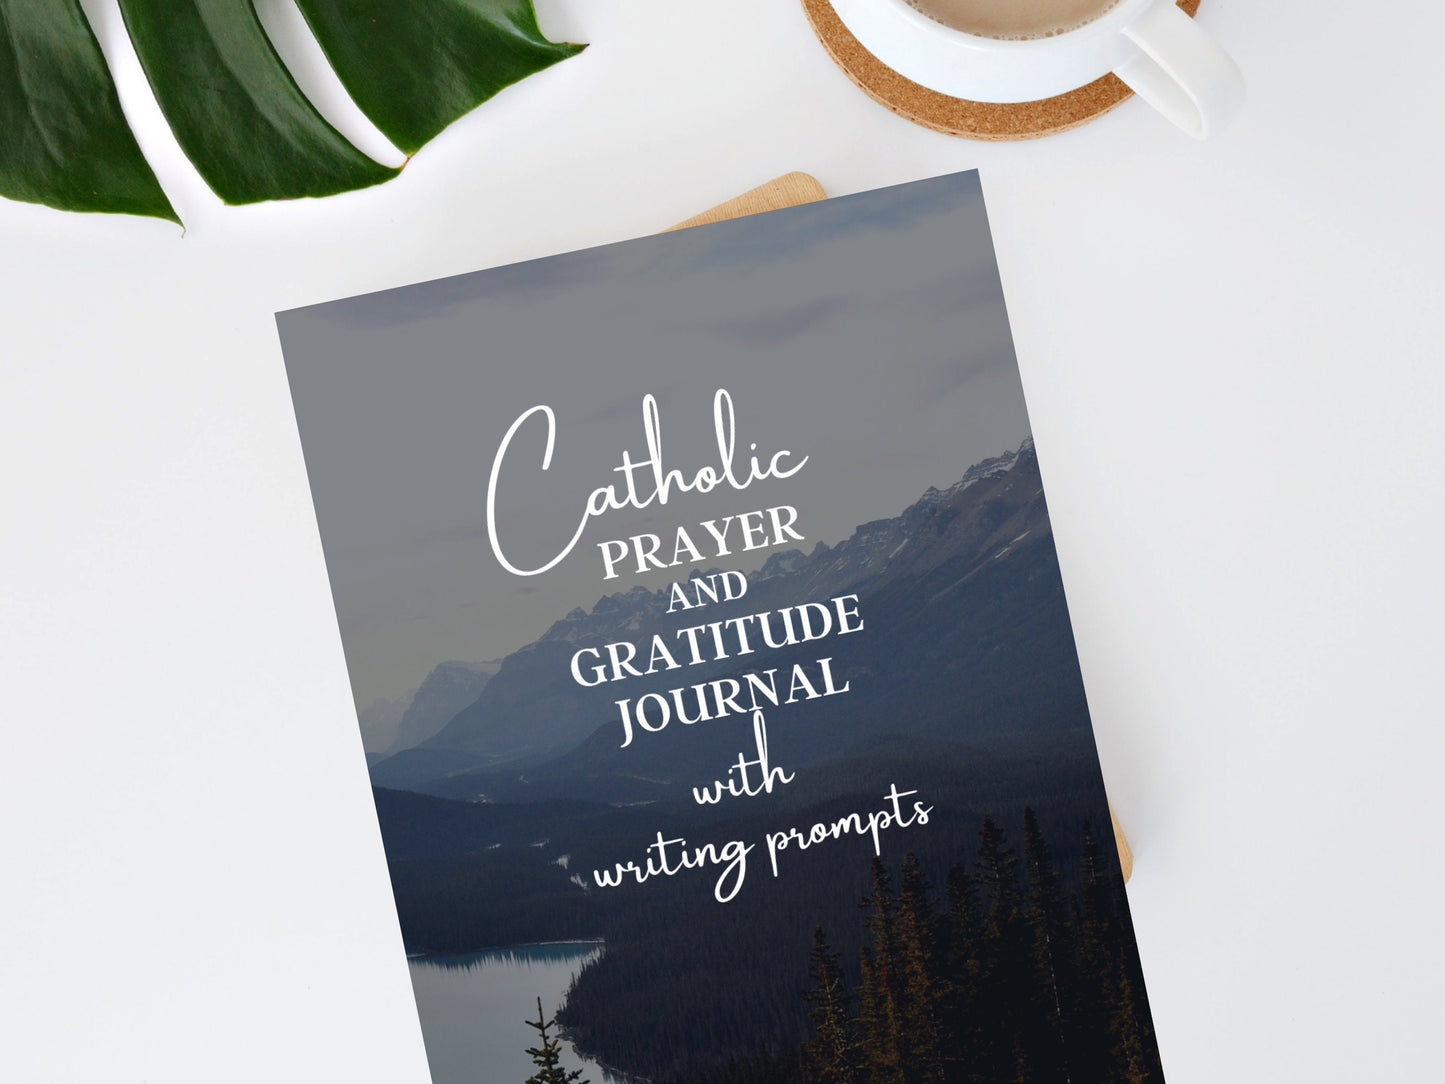 Catholic Prayer and Gratitude Journal with writing prompts/Catholic Journaling/Religious Education/Confirmation/Retreats prayer book